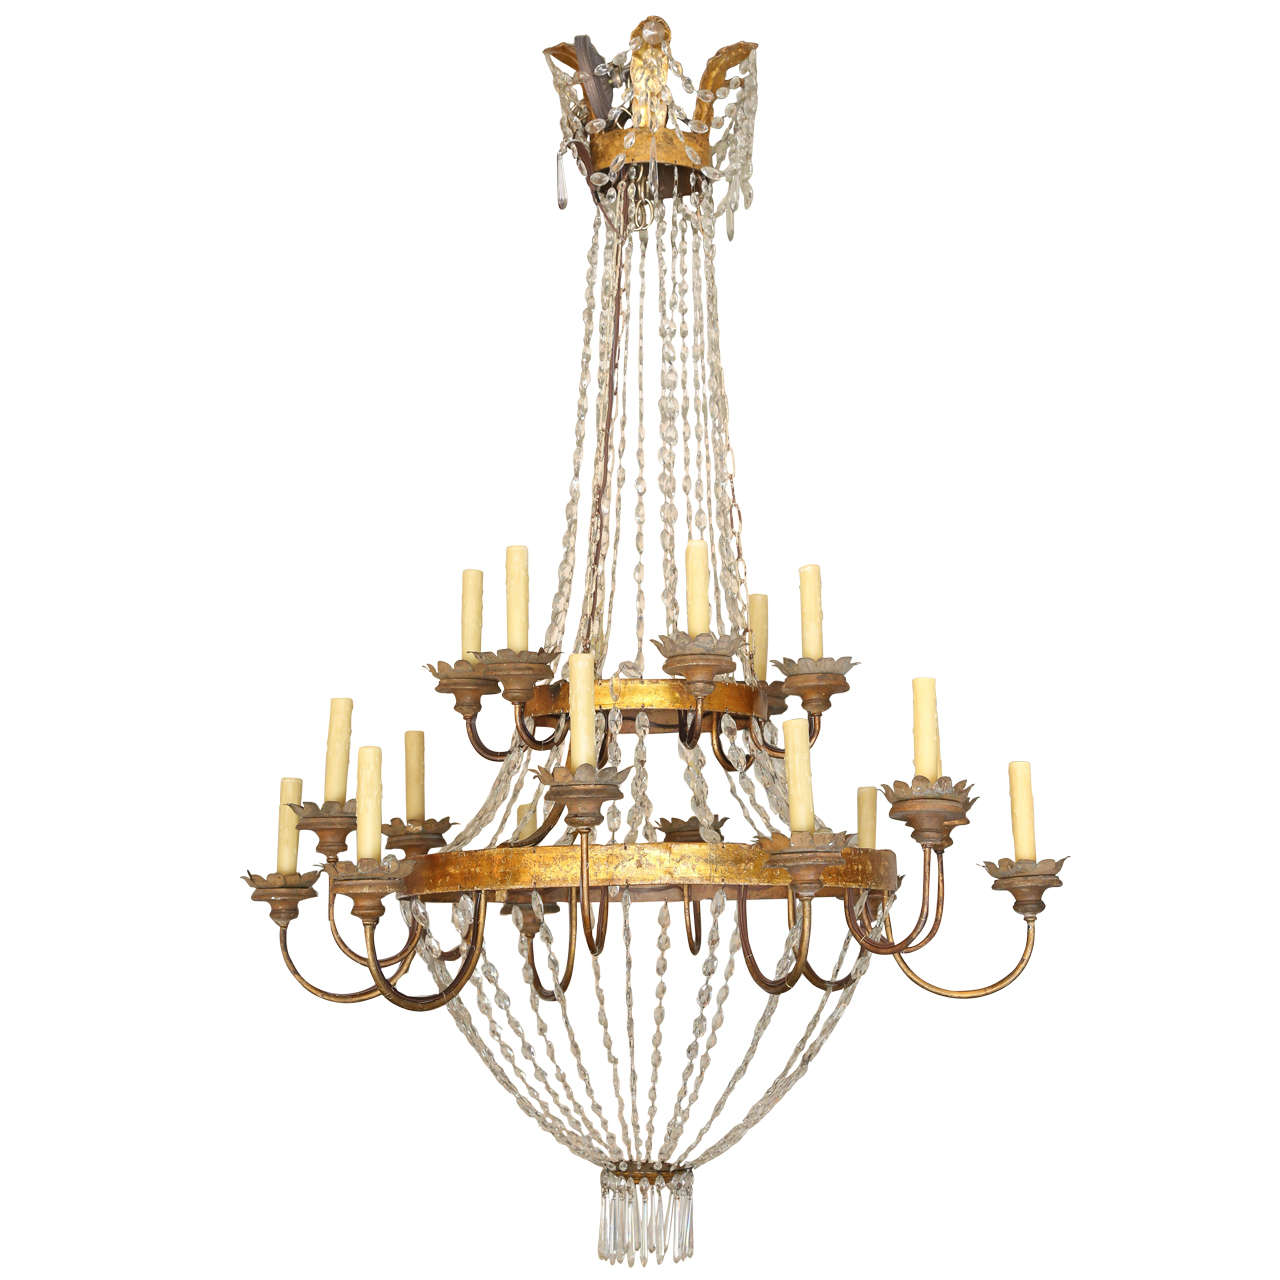 Large Early 19th Century Chandelier from Lucca